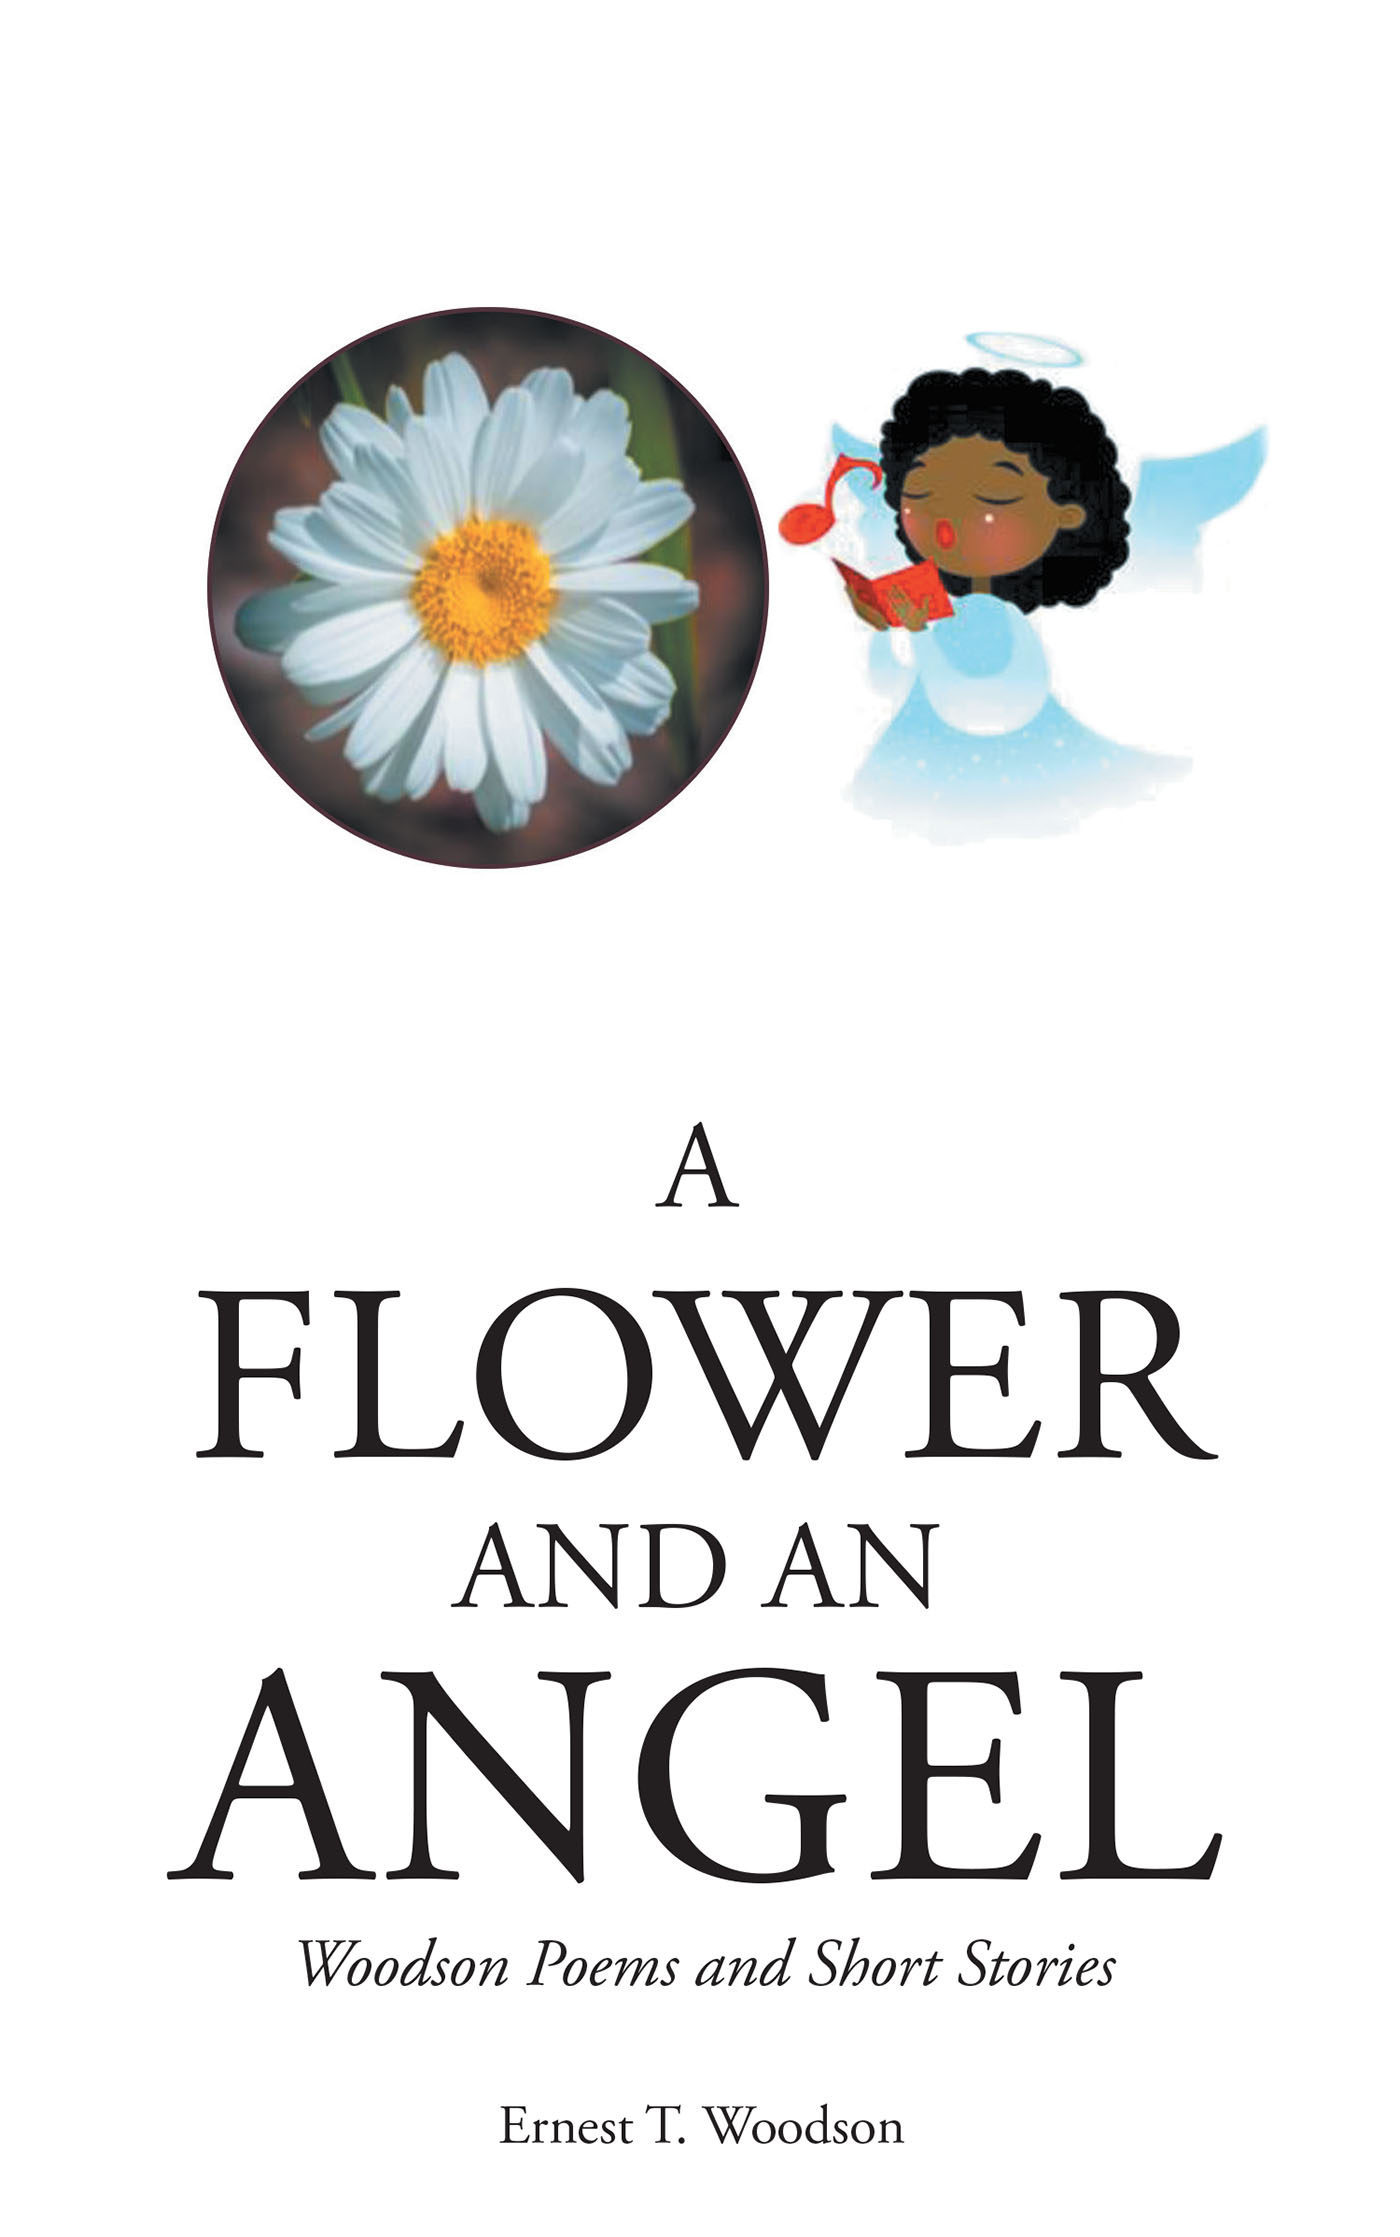 Author Ernest T. Woodson’s New Book, "A Flower and an Angel," Explores the Author's Path Through Life and How He Was Supported by His Loved Ones and His Faith in God